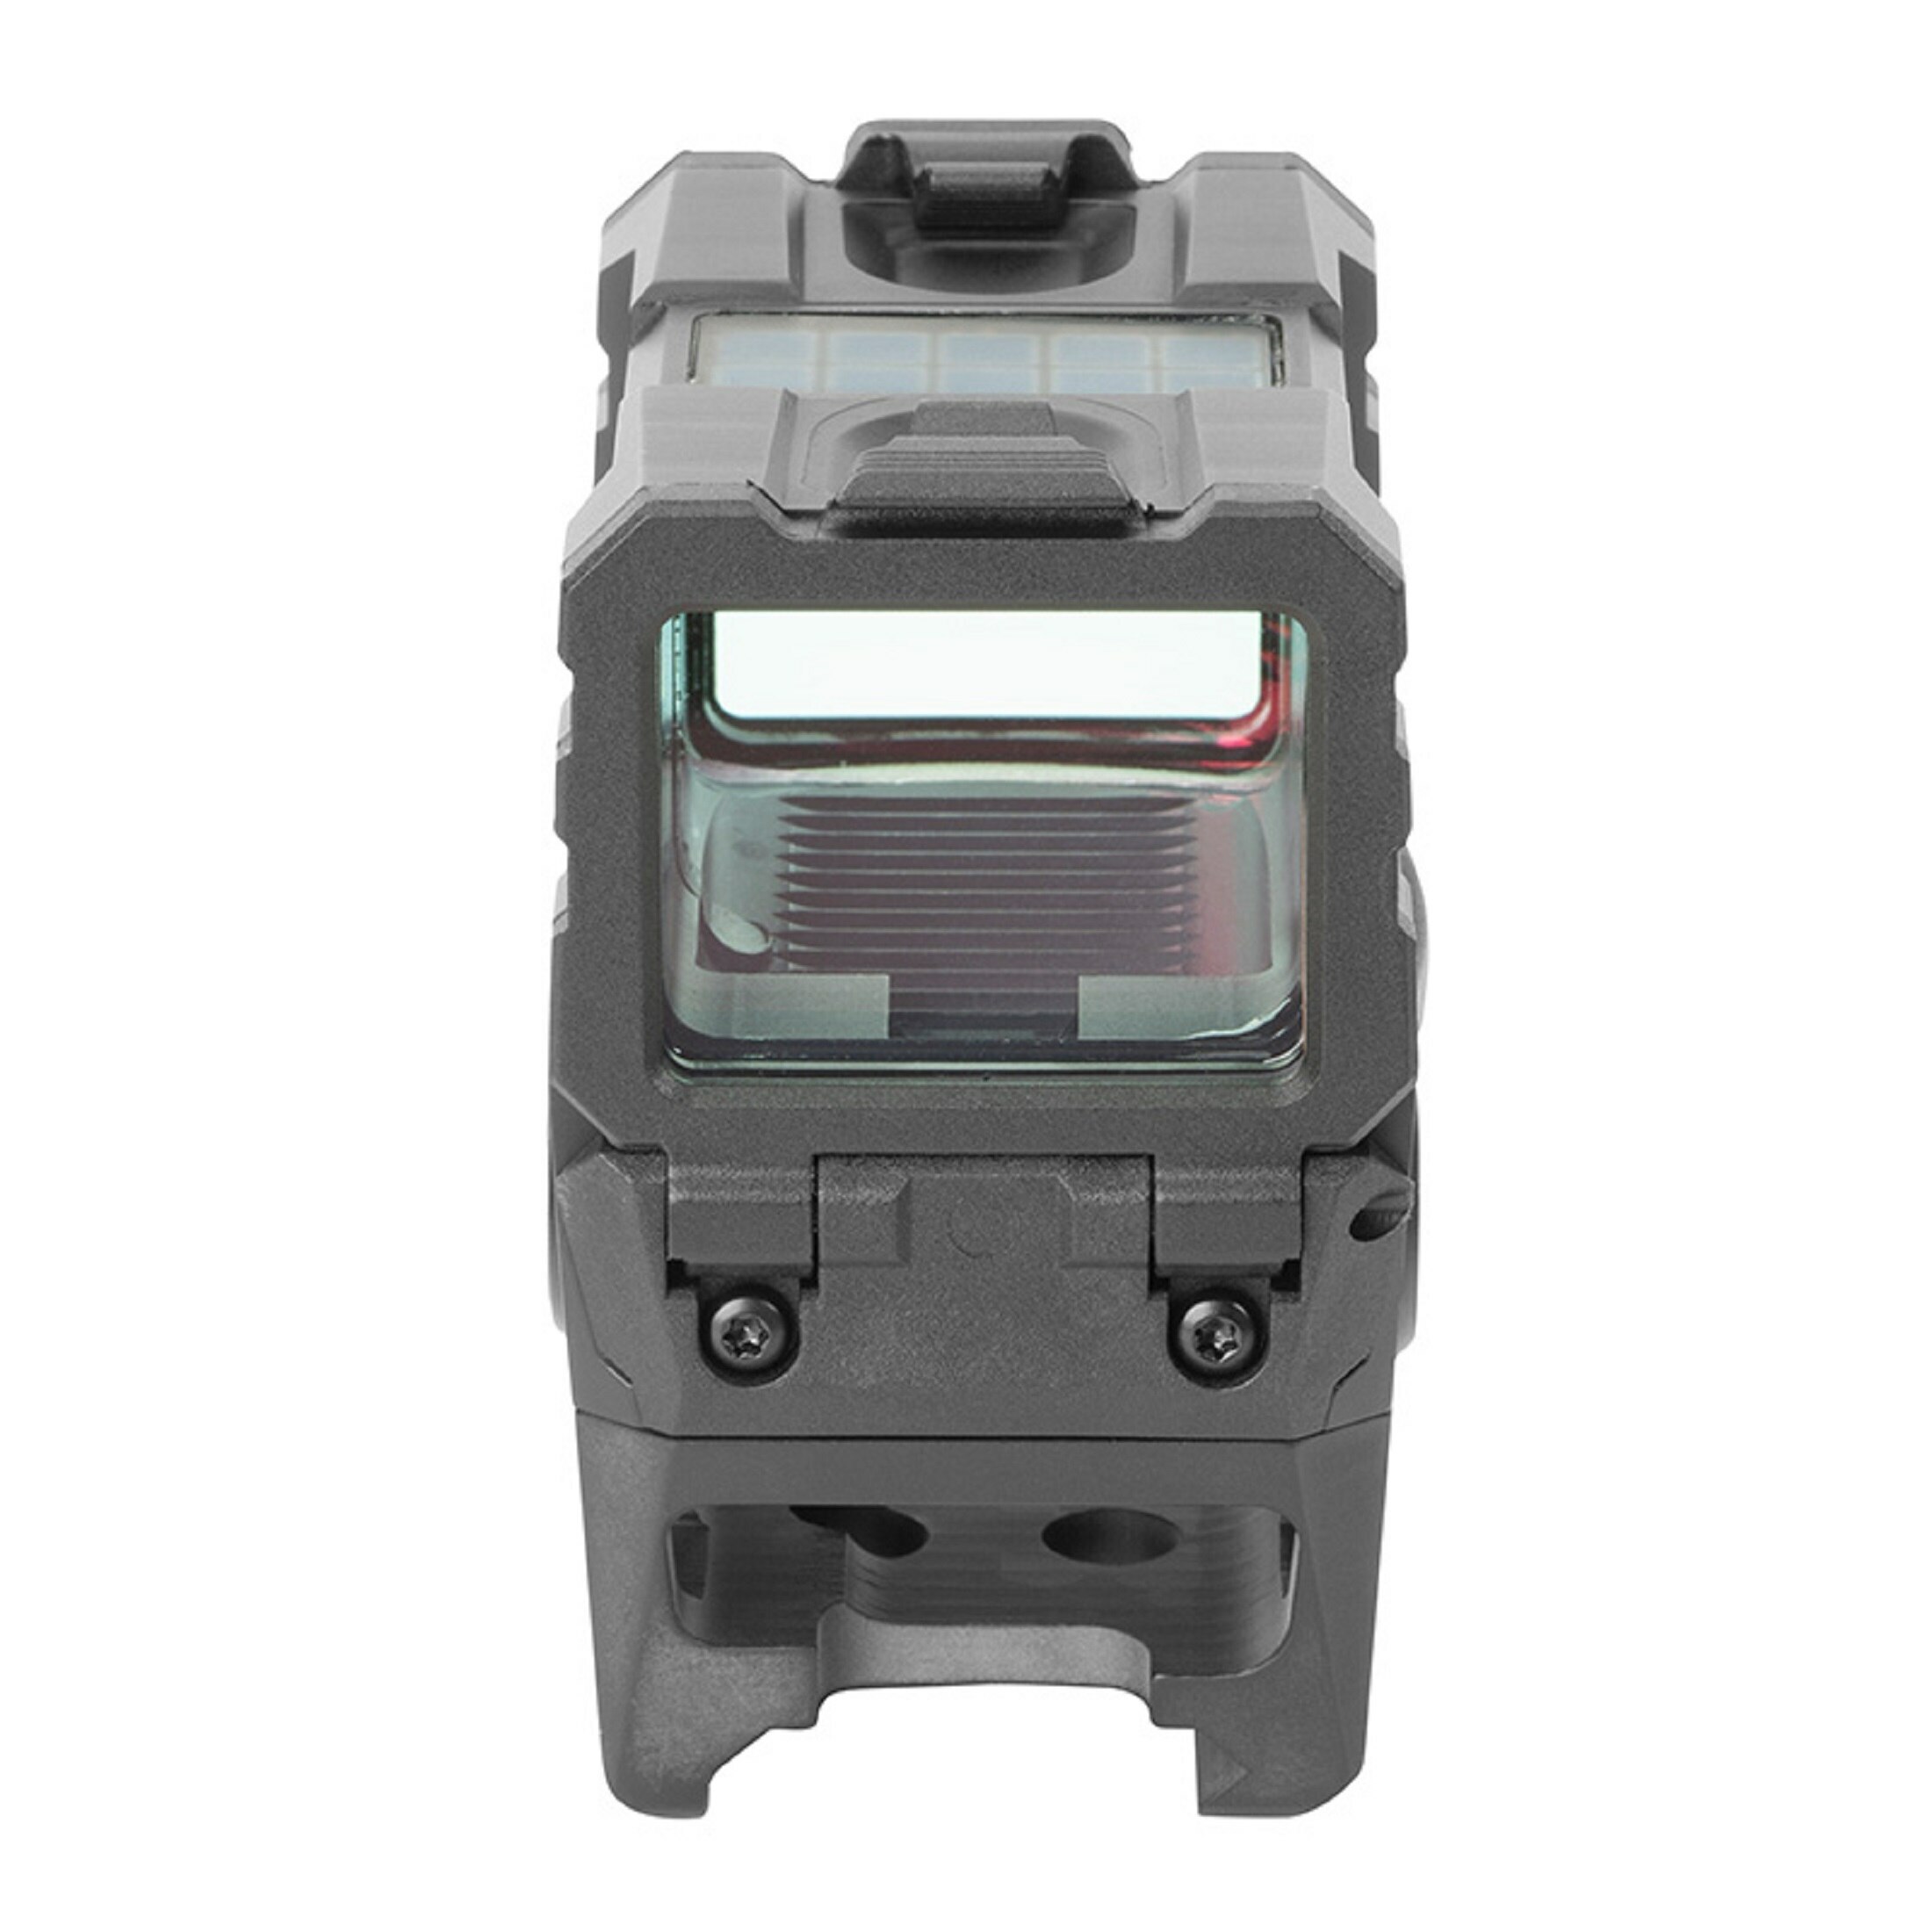 Holosun Classic Reflex Green Dot Sight AEMS-GR with switchable reticle and aluminium housing, glass…